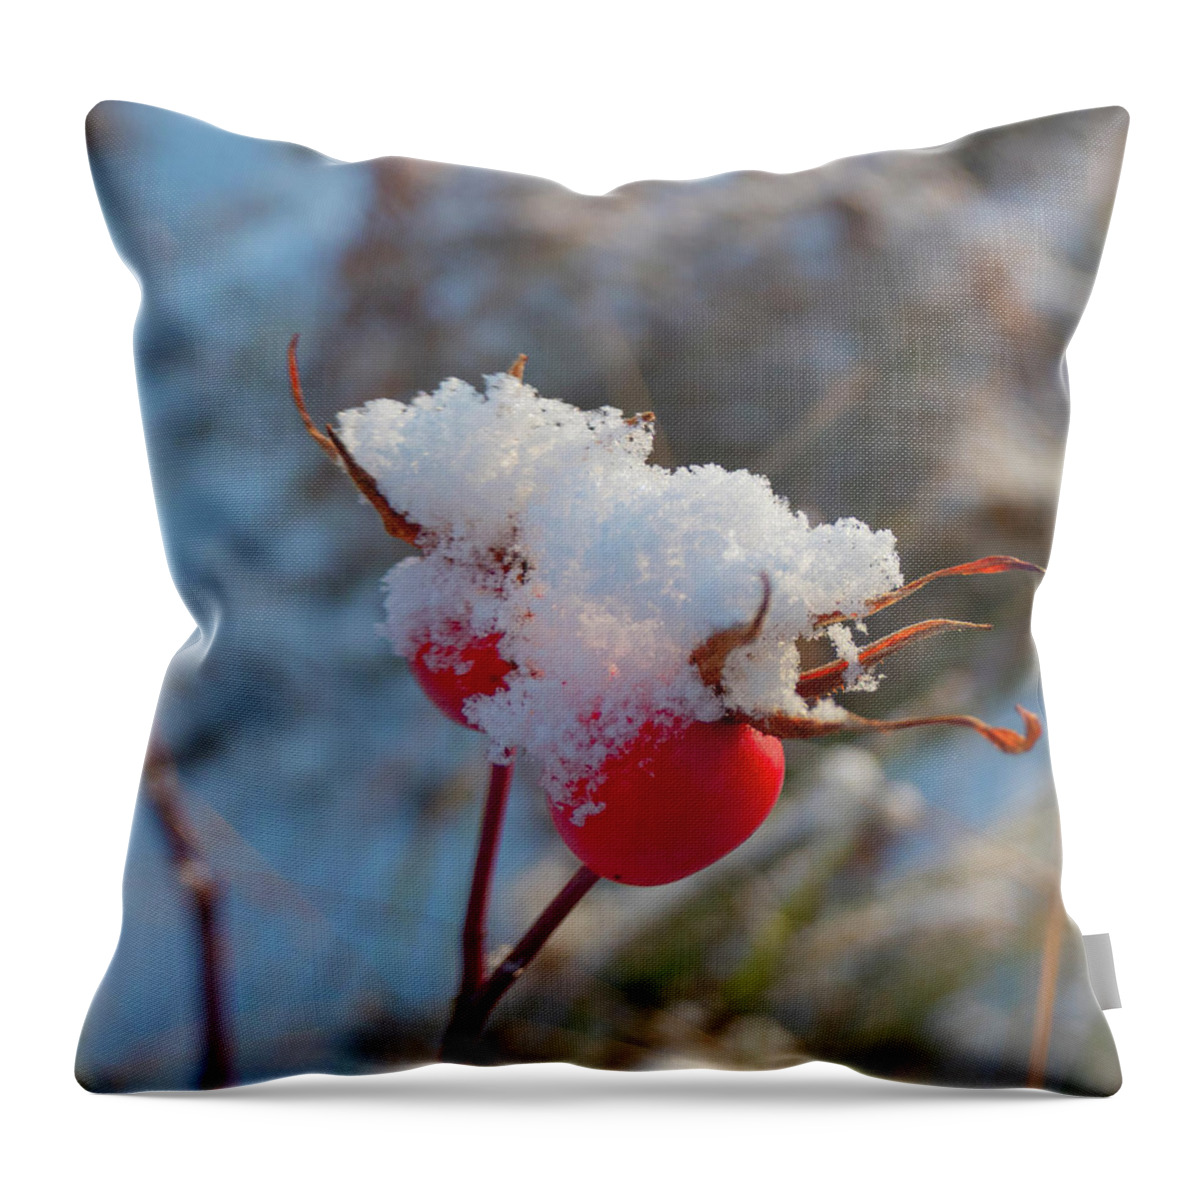 Rose Hips Throw Pillow featuring the photograph Snow On Rose Hips by Karen Rispin